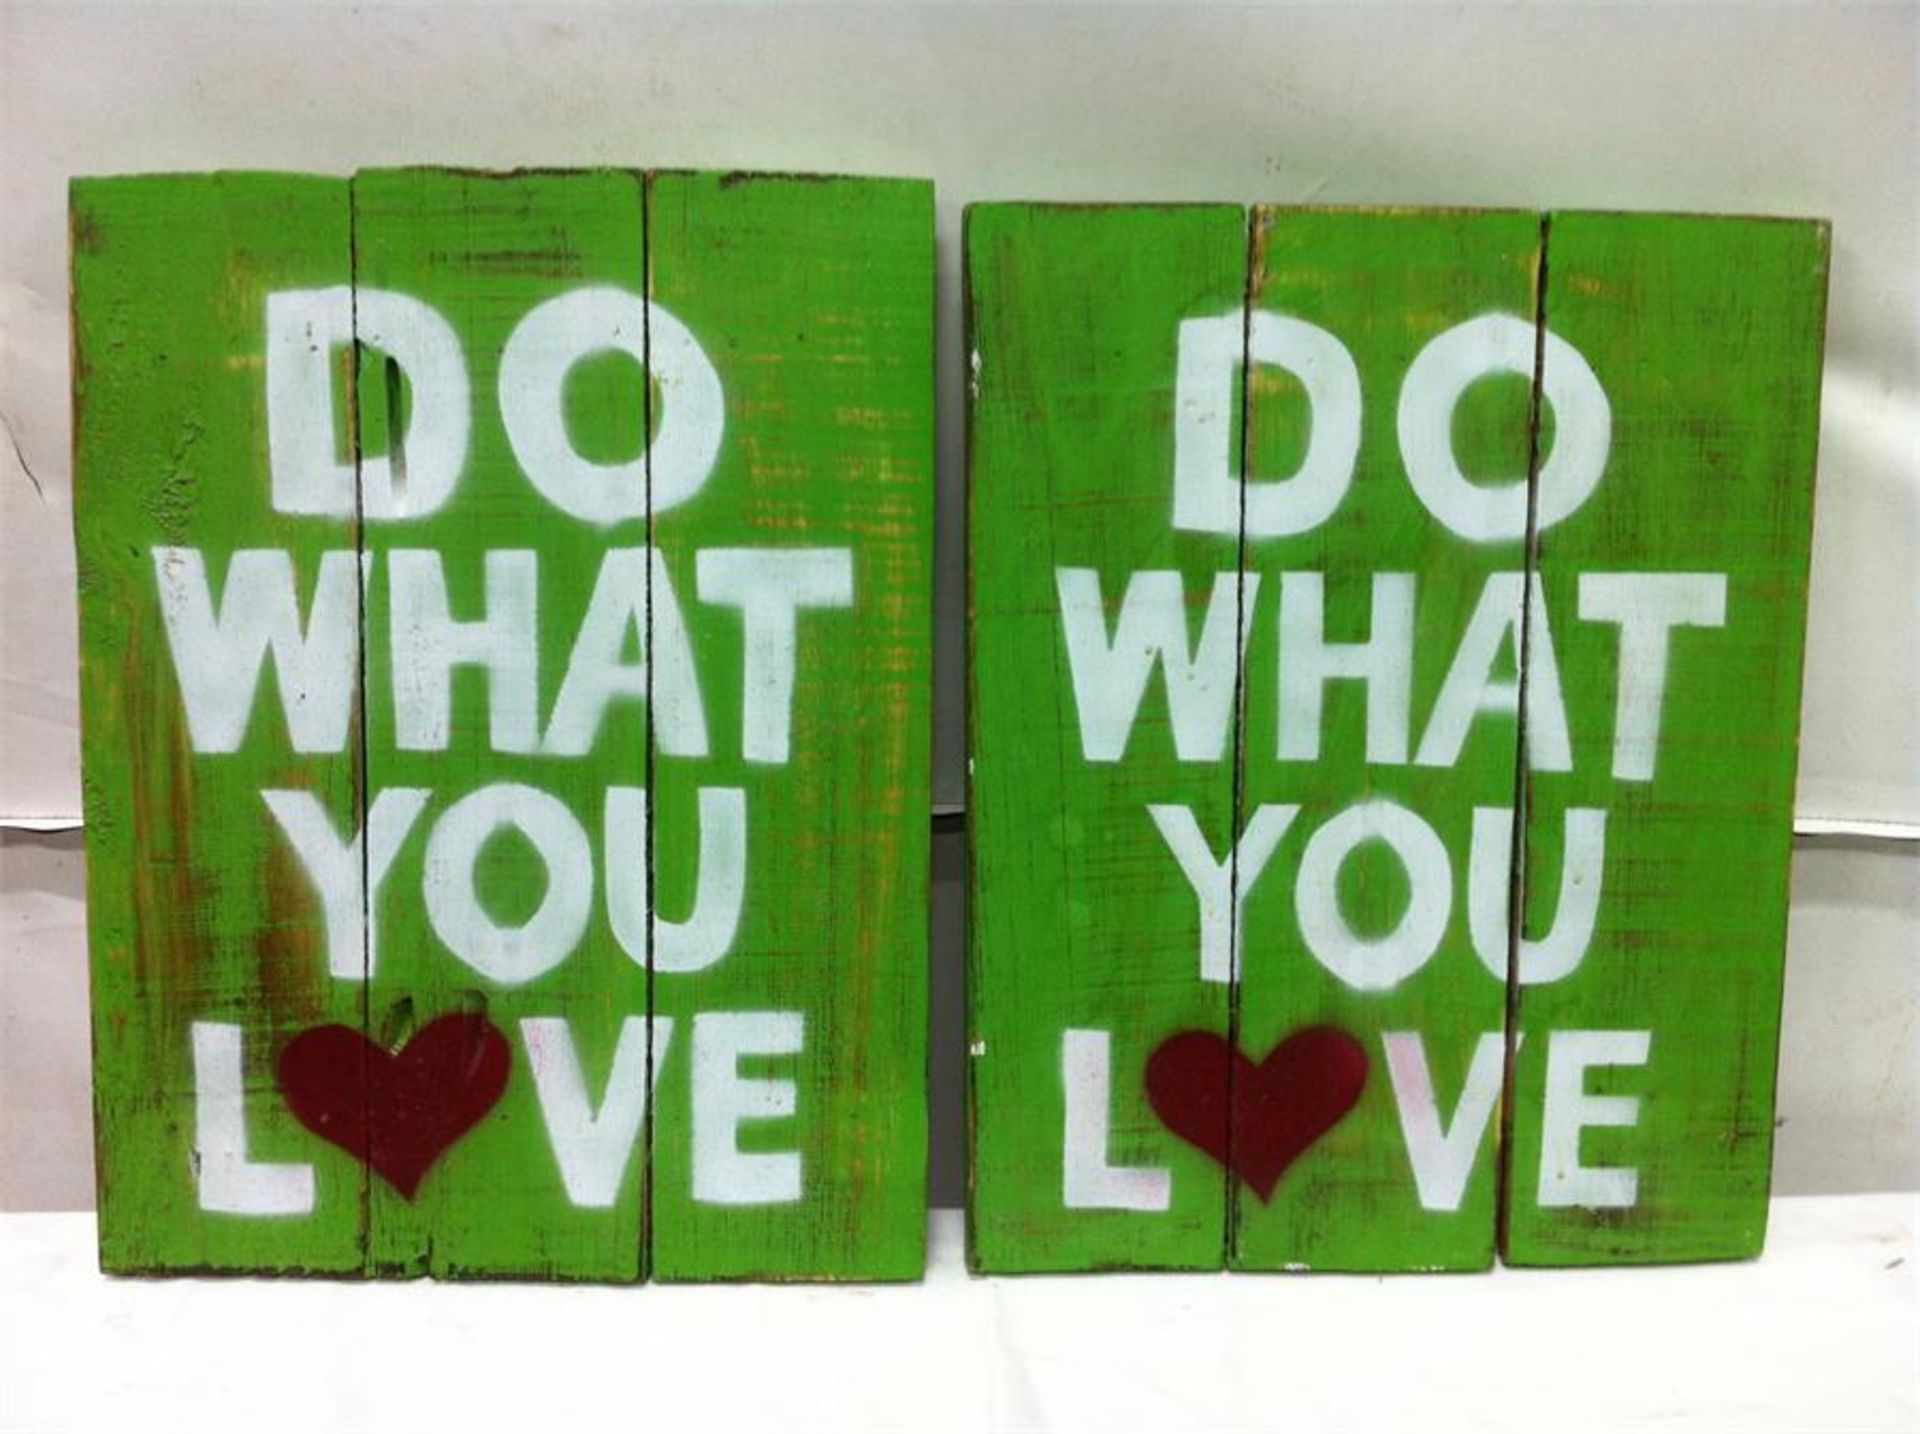 14 x Handpainted wooden signs with popular sayings. See description for more details. - Image 8 of 10